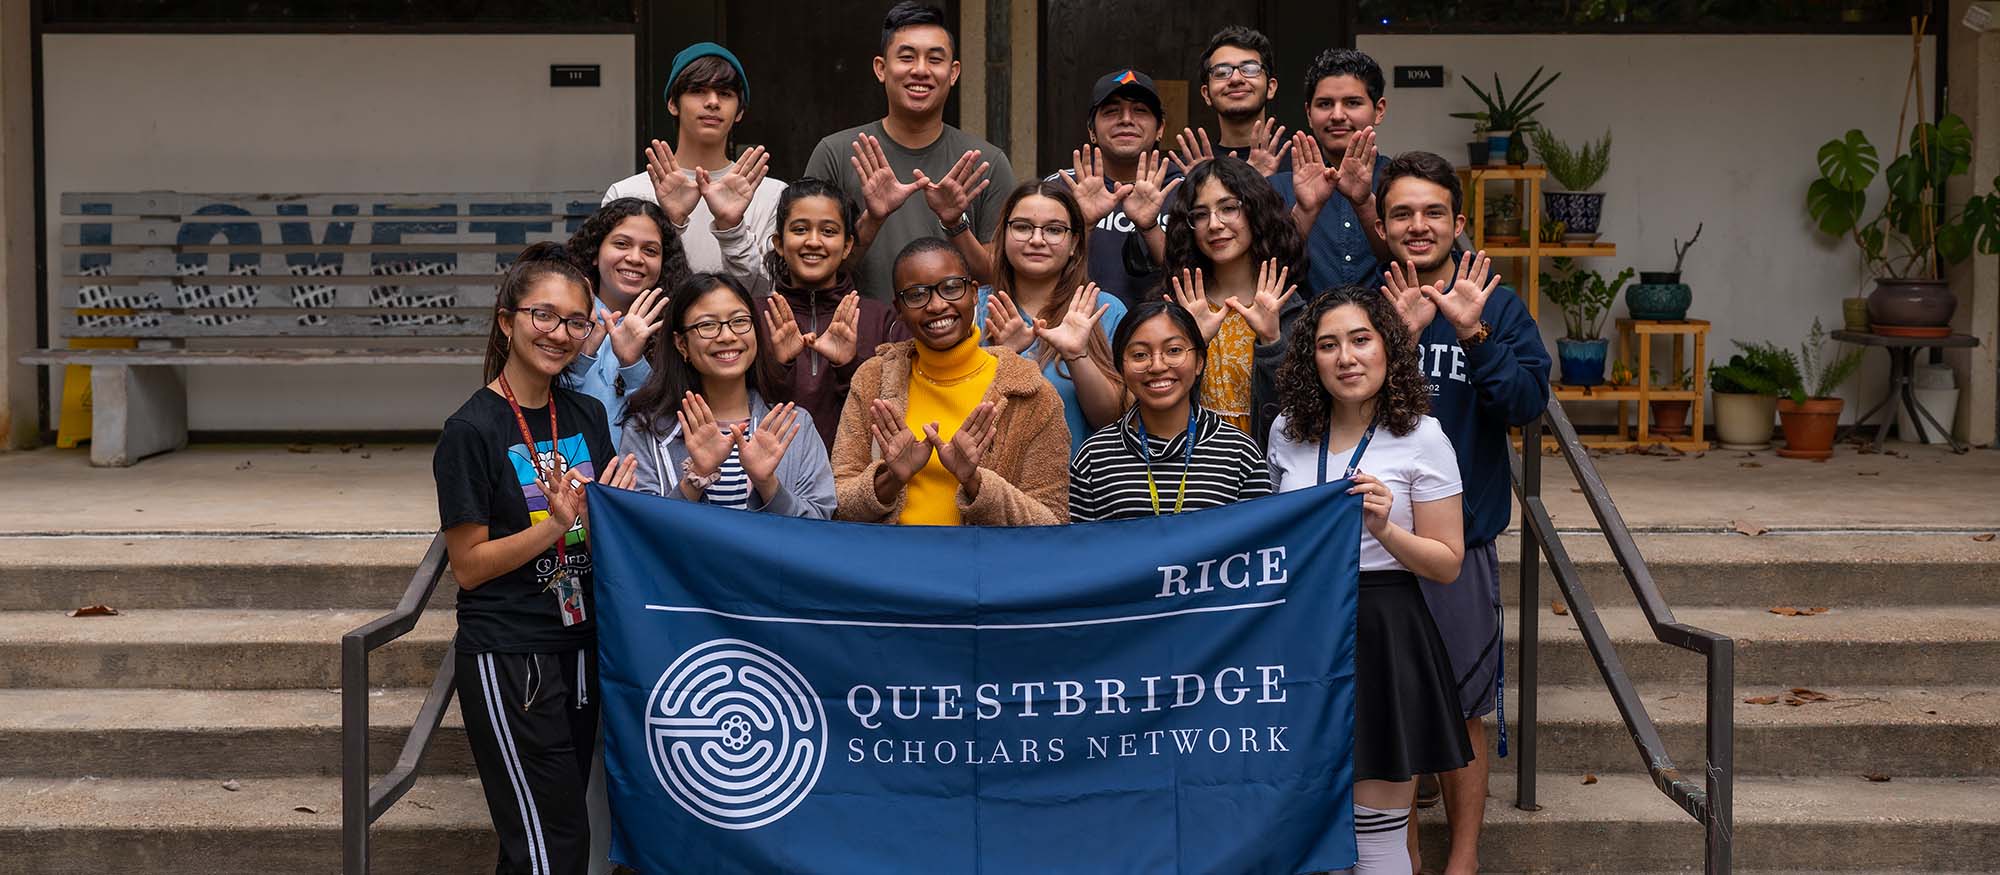 A group of students that are apart of the Questbridge Scholars Network pose and smile for a picture while holding a flag that says "Questbridge Scholars Network."